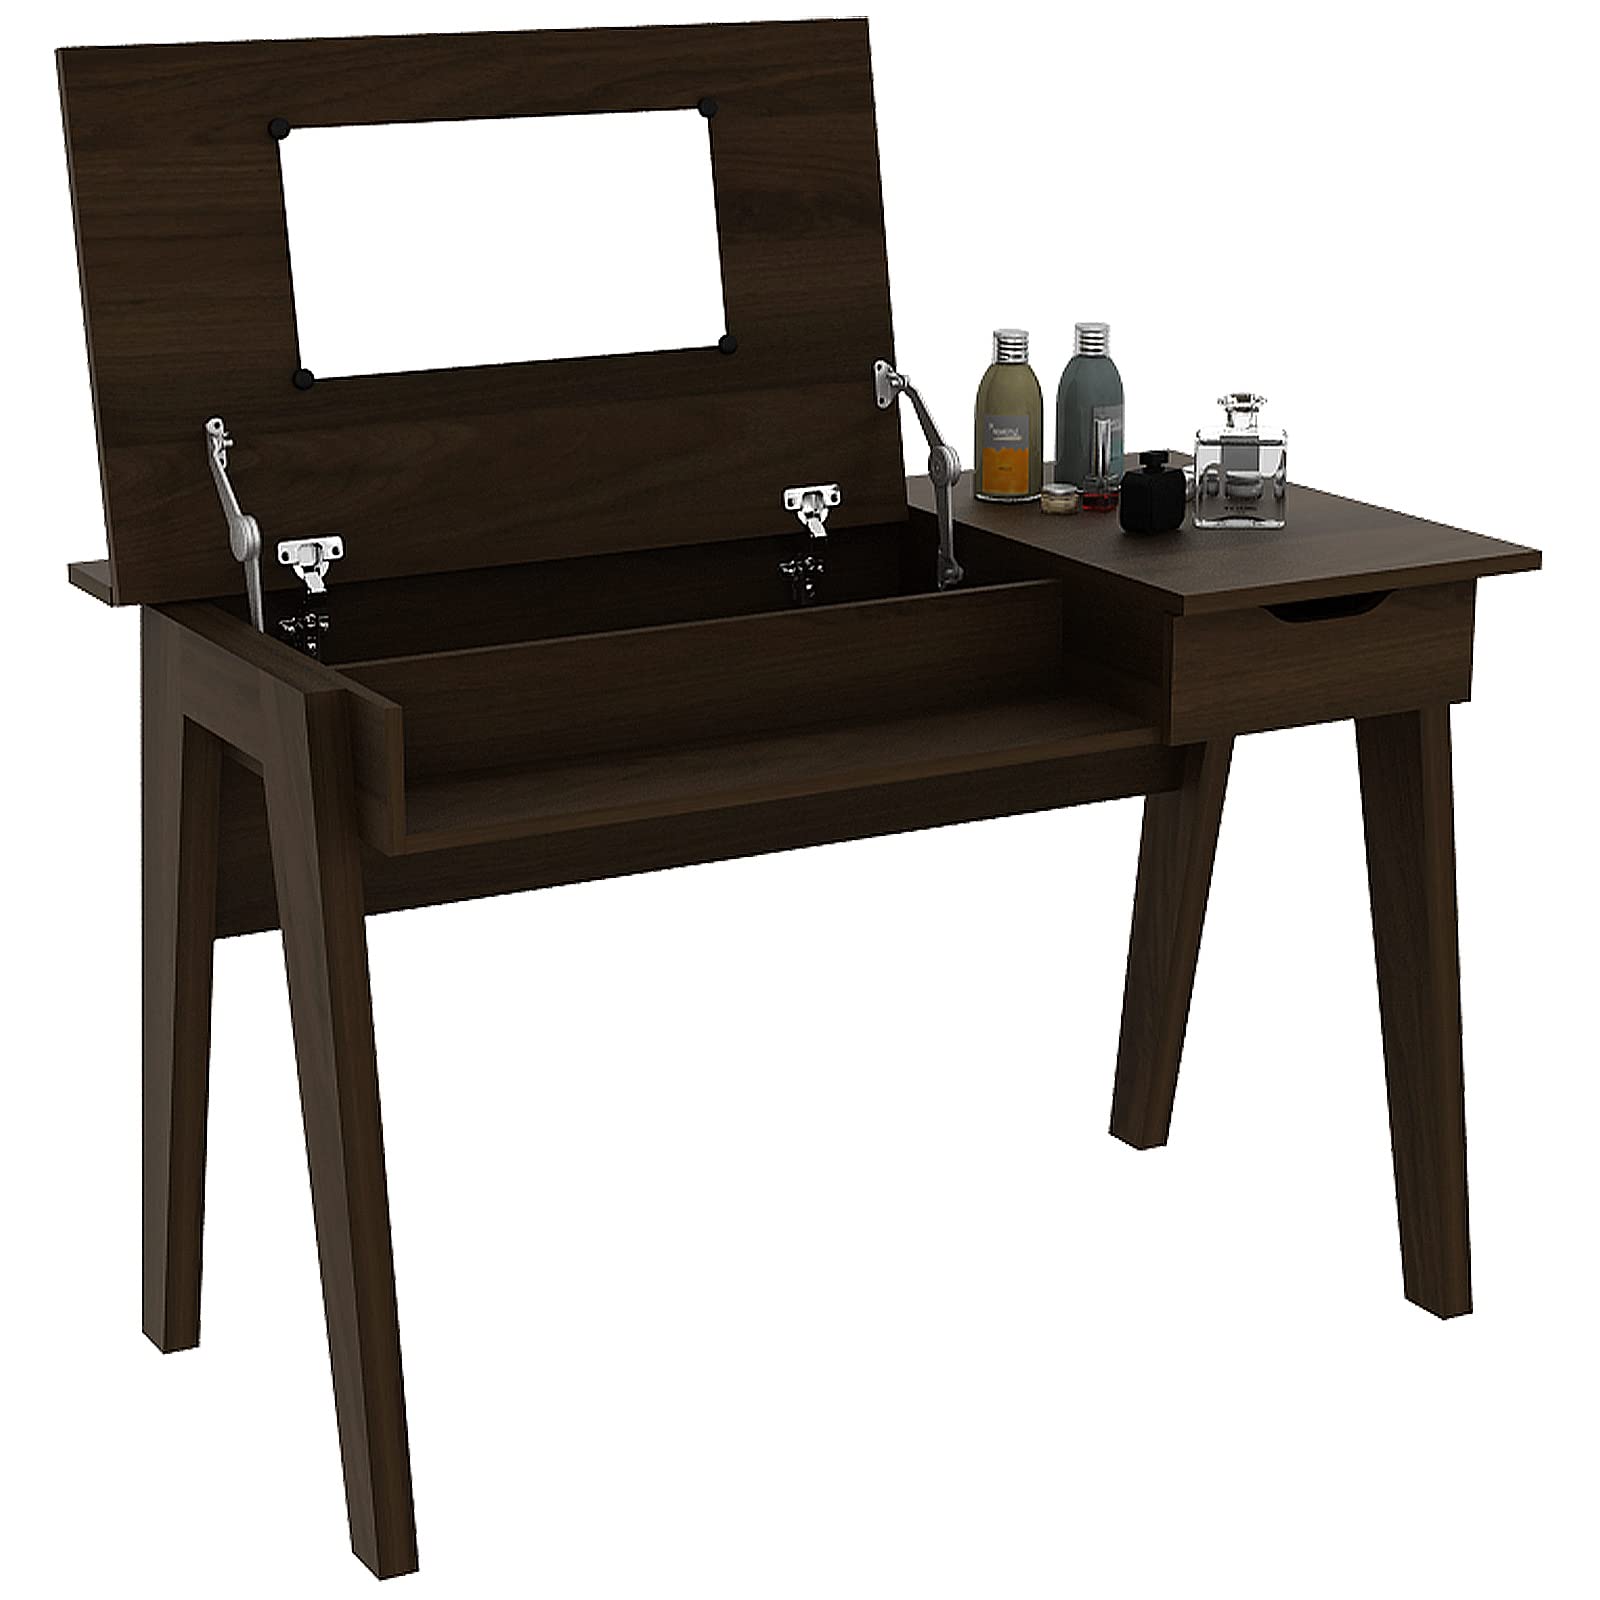 CHARMAID Vanity Table with Flip Top Mirror, 48'' Home Office Computer Desk